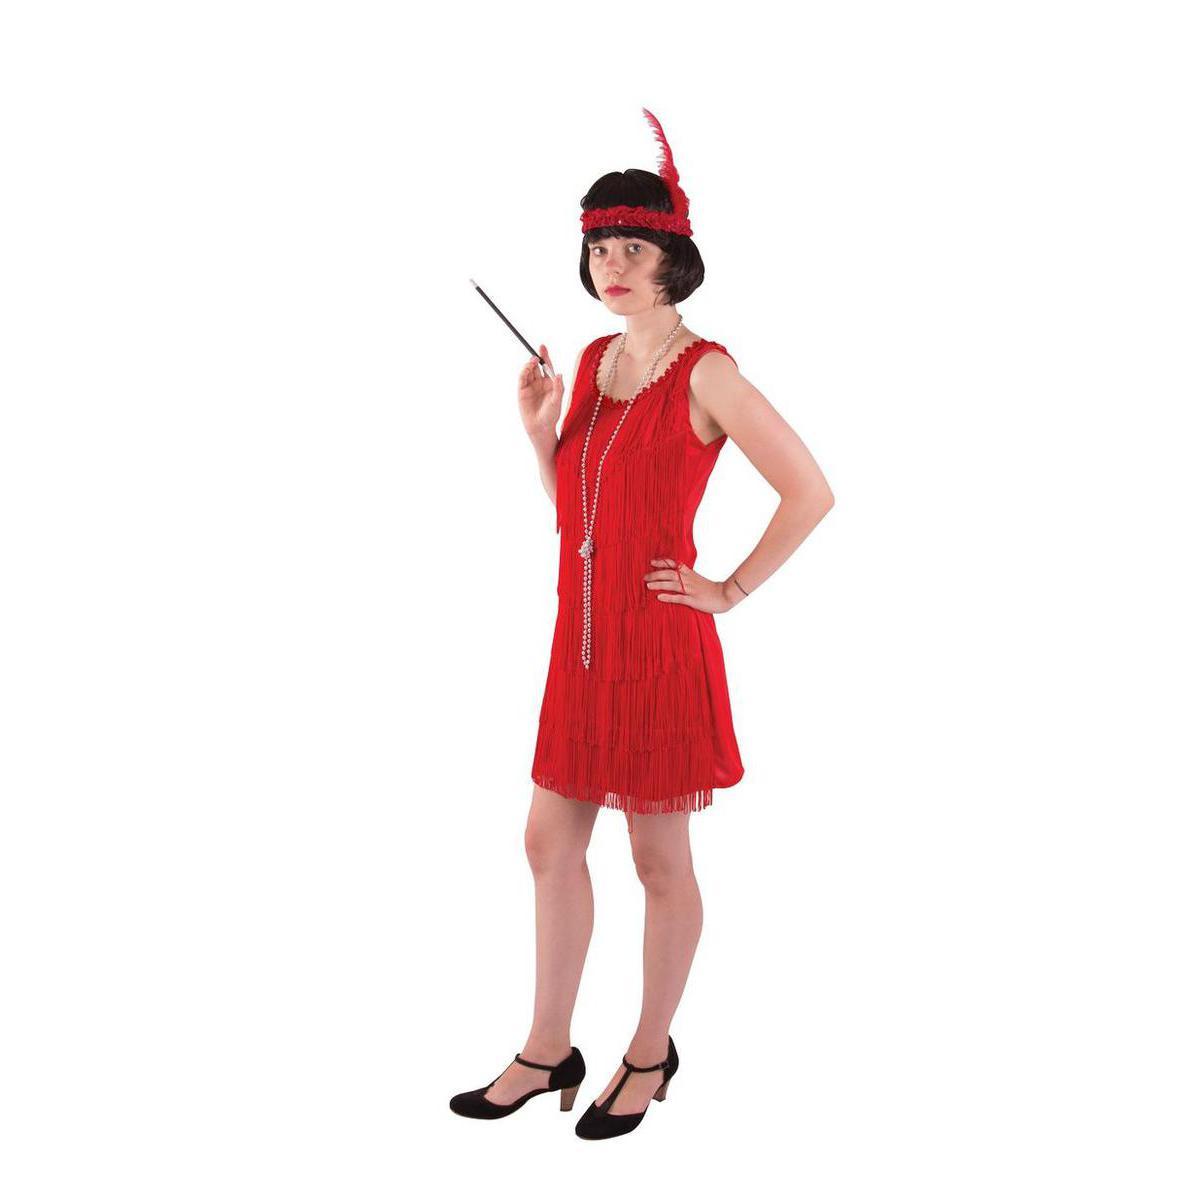 Costume adulte robe charleston en polyester - Taille unique - Rouge